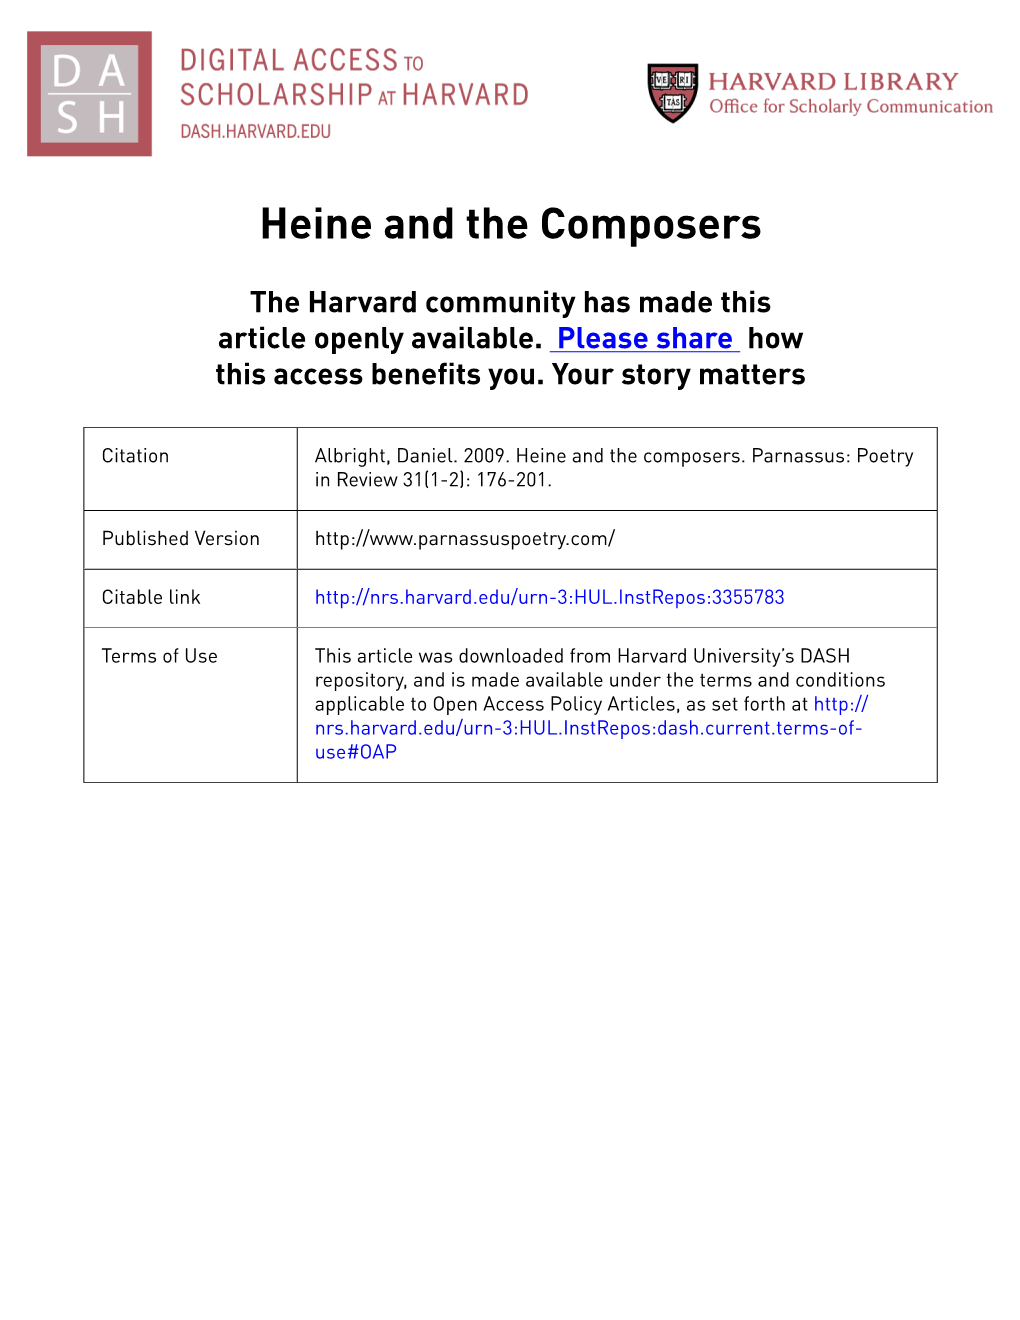 Heine and the Composers